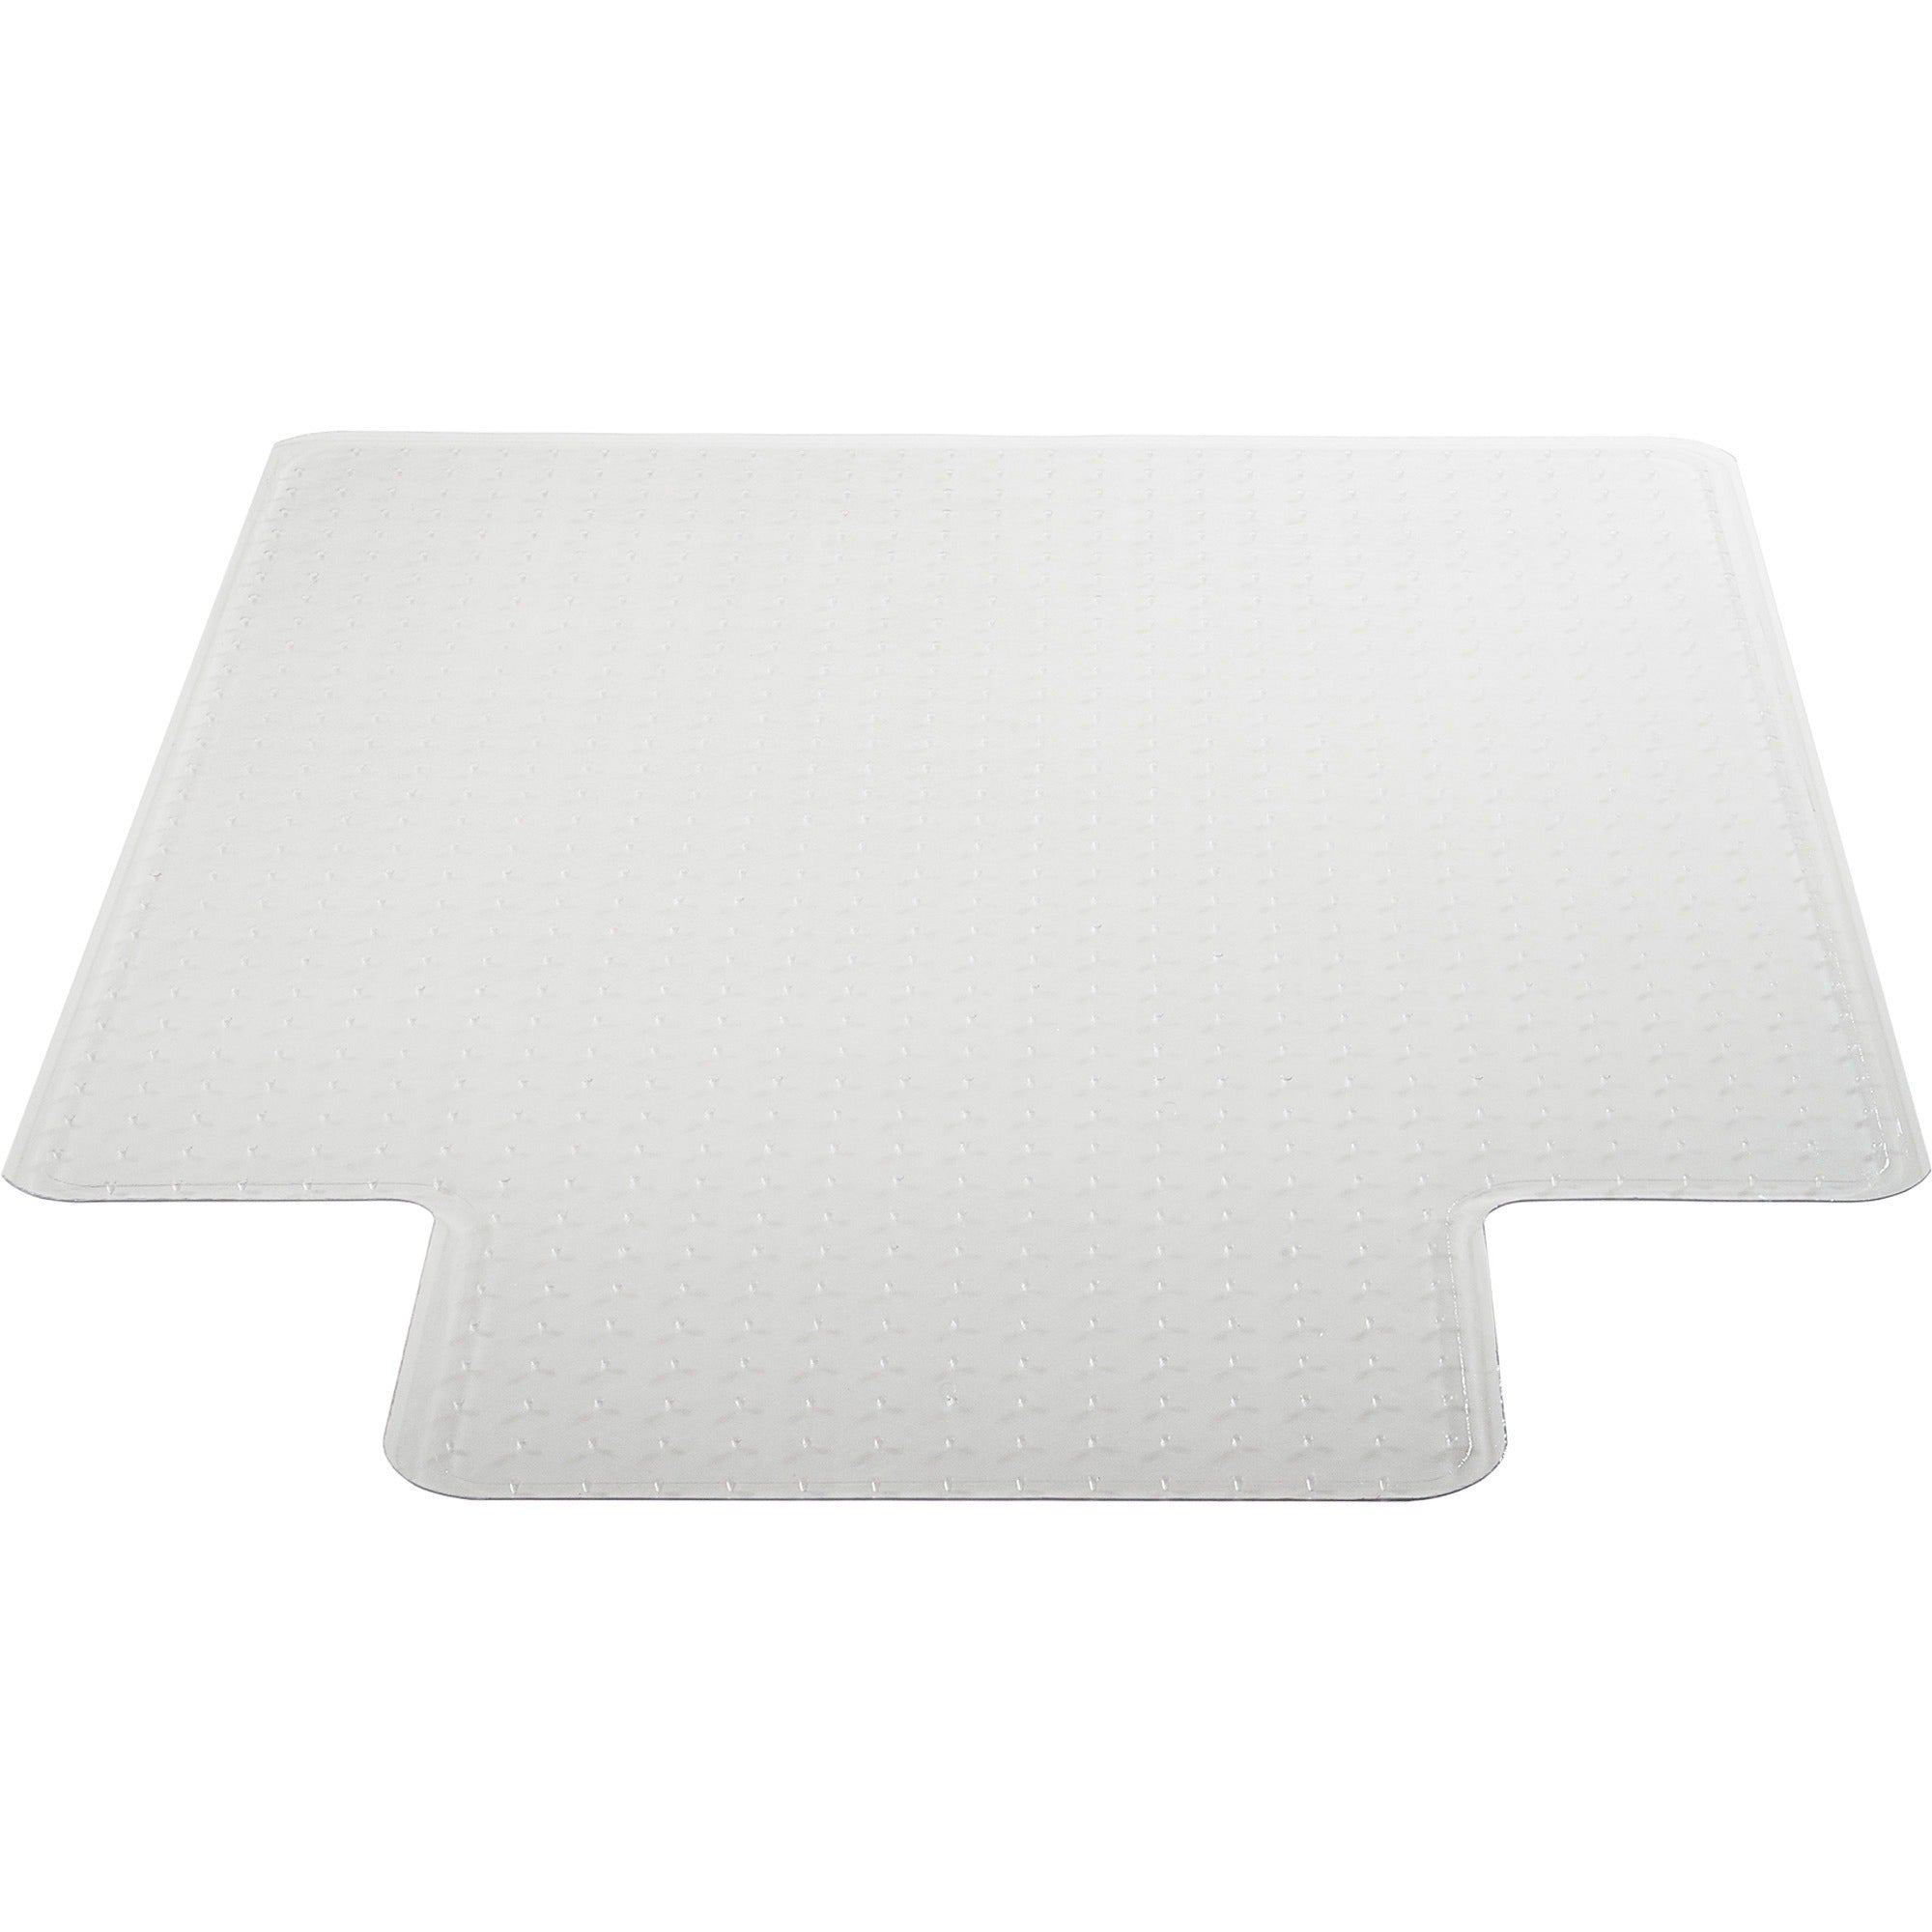 Lorell Wide Lip Low-pile Chairmat - Carpeted Floor - 53" Length x 45" Width x 0.112" Thickness - Lip Size 12" Length x 25" Width - Vinyl - Clear - 1Each - 